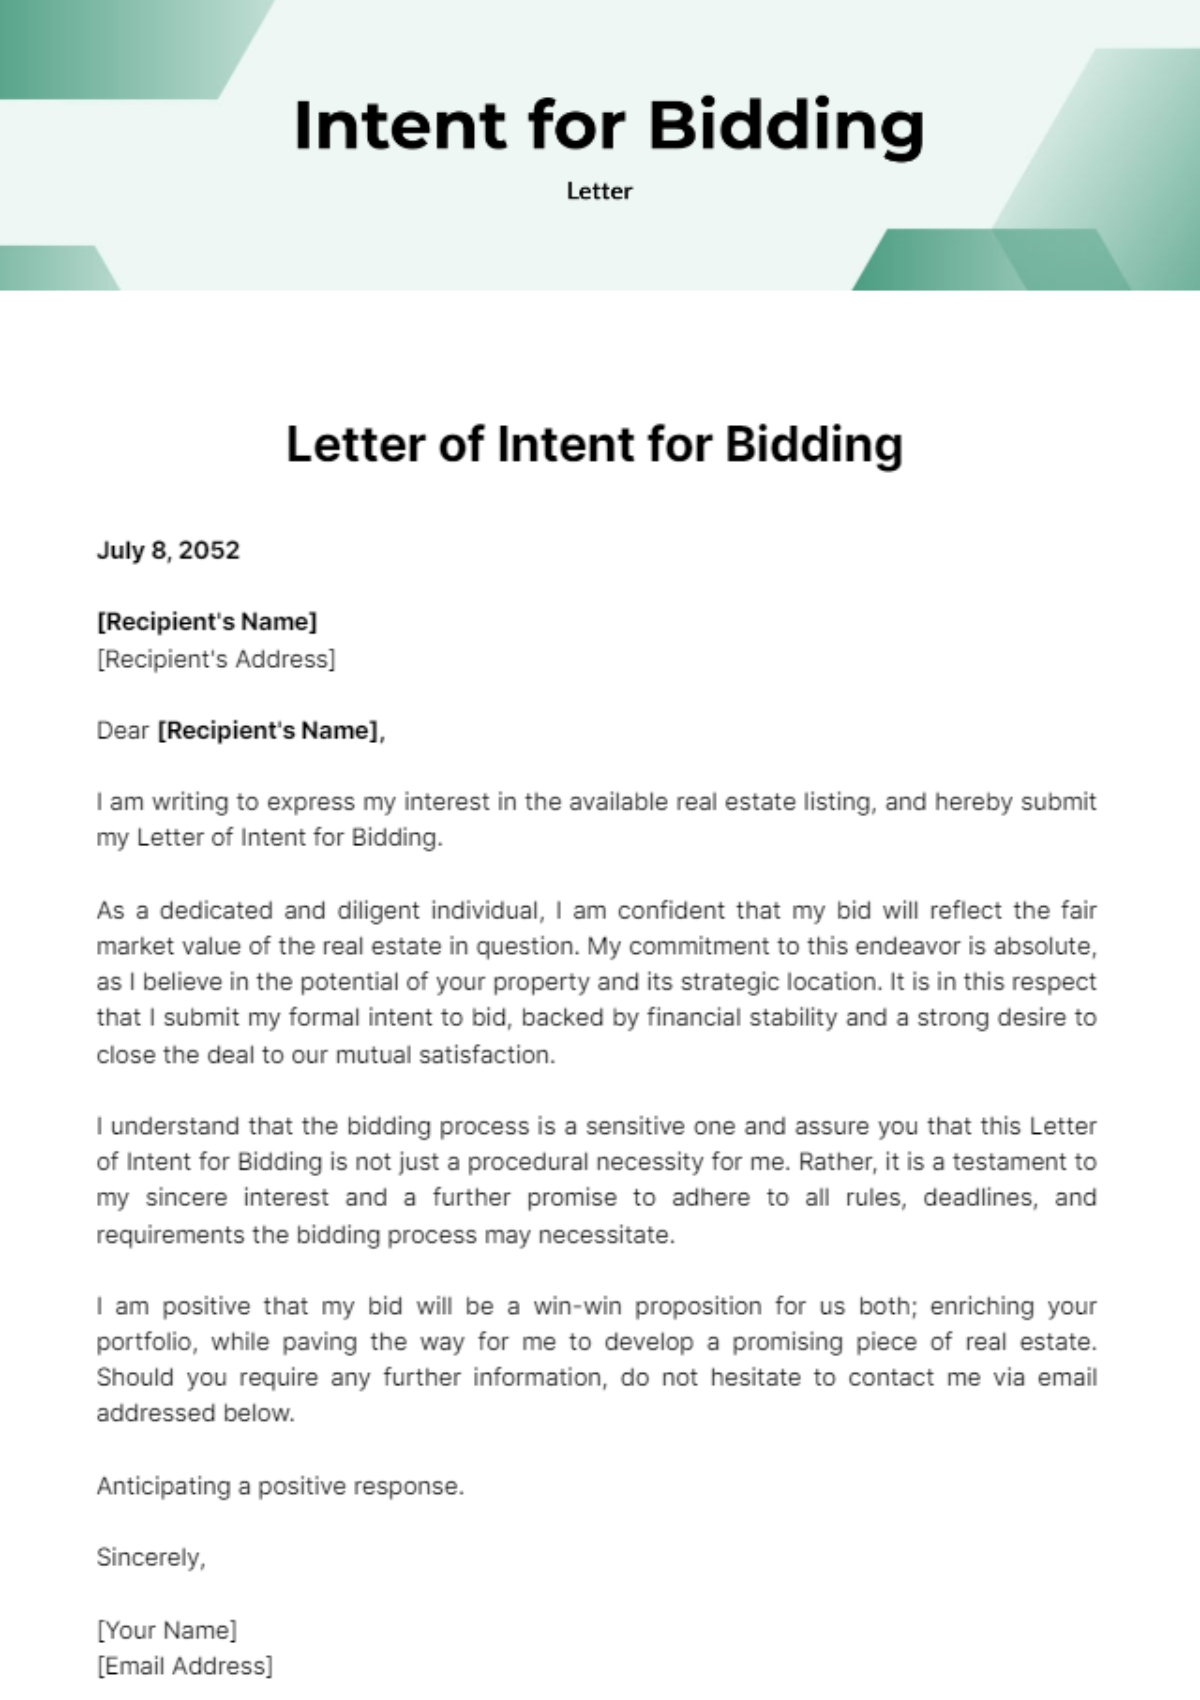 Free Letter of Intent for Bidding Template